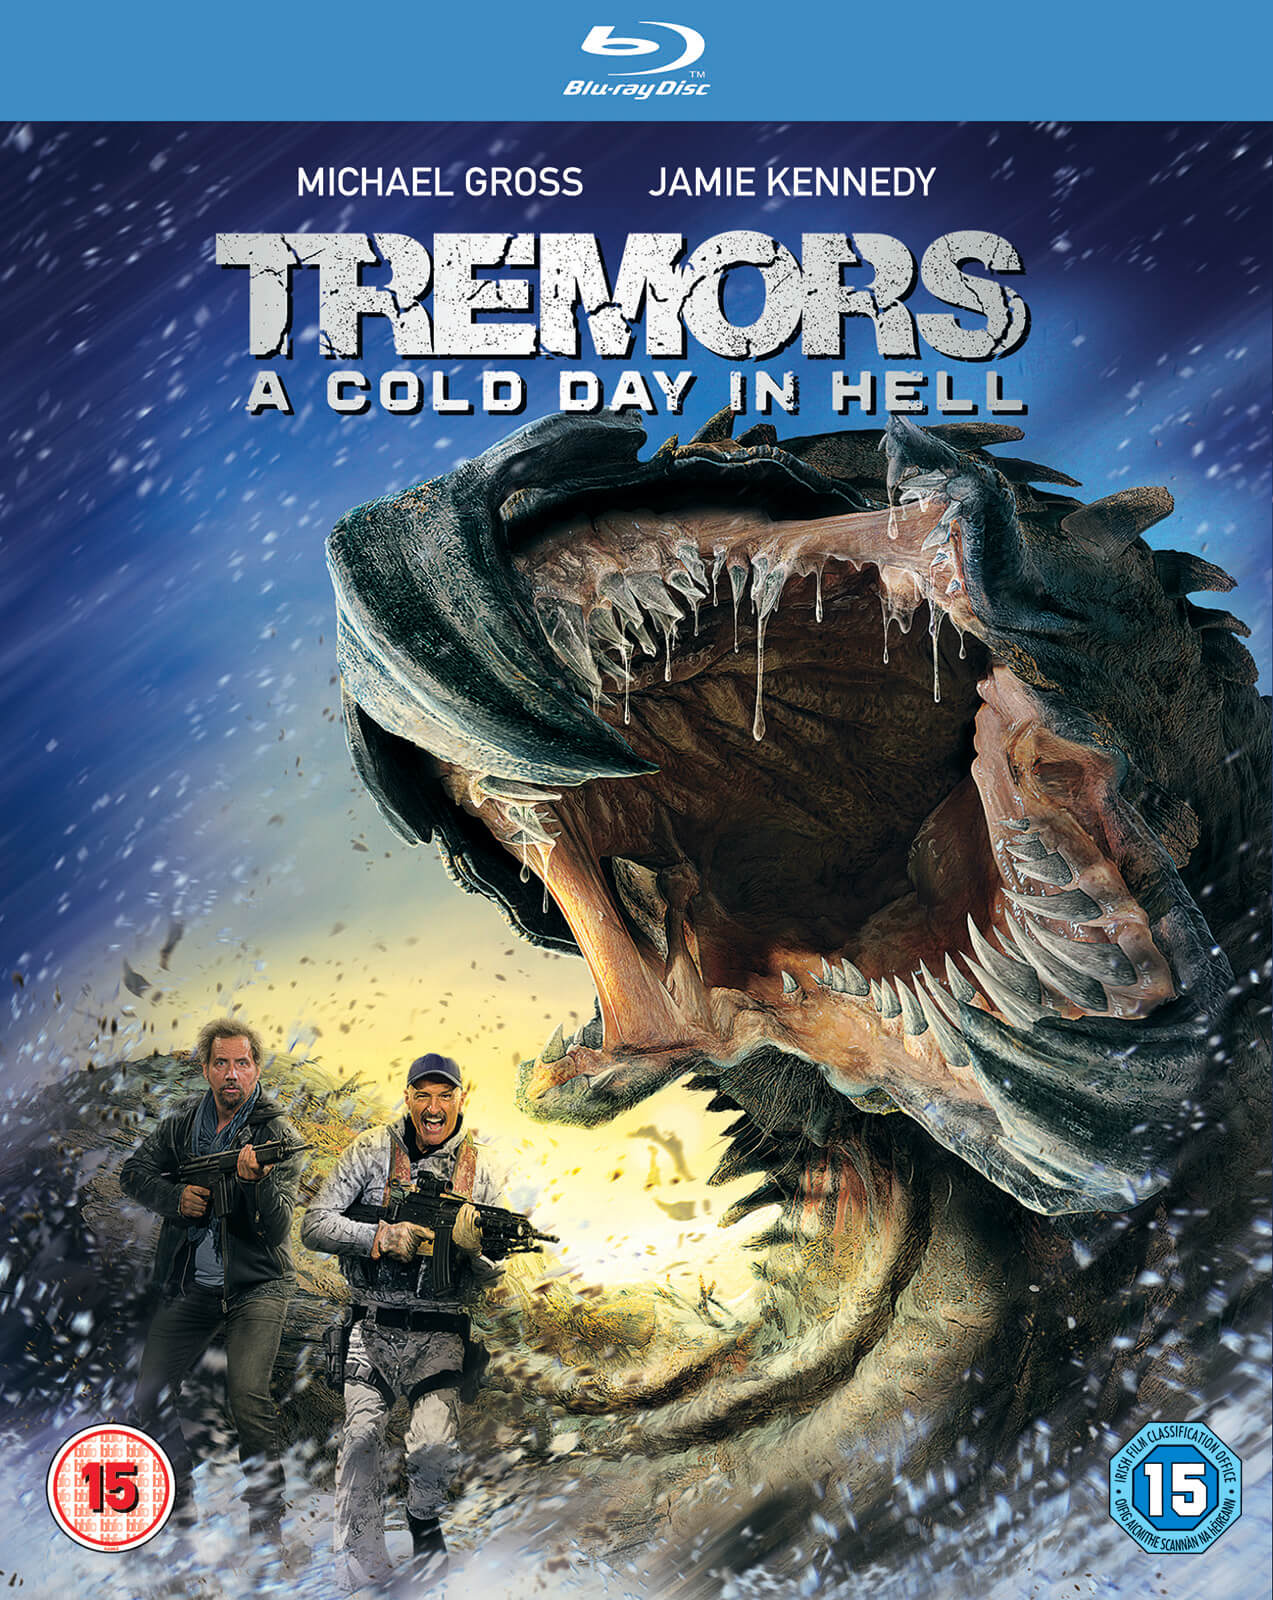 TREMORS: A COLD DAY IN HELL-áá¡ á¡á£á áááá¡ á¨ááááá